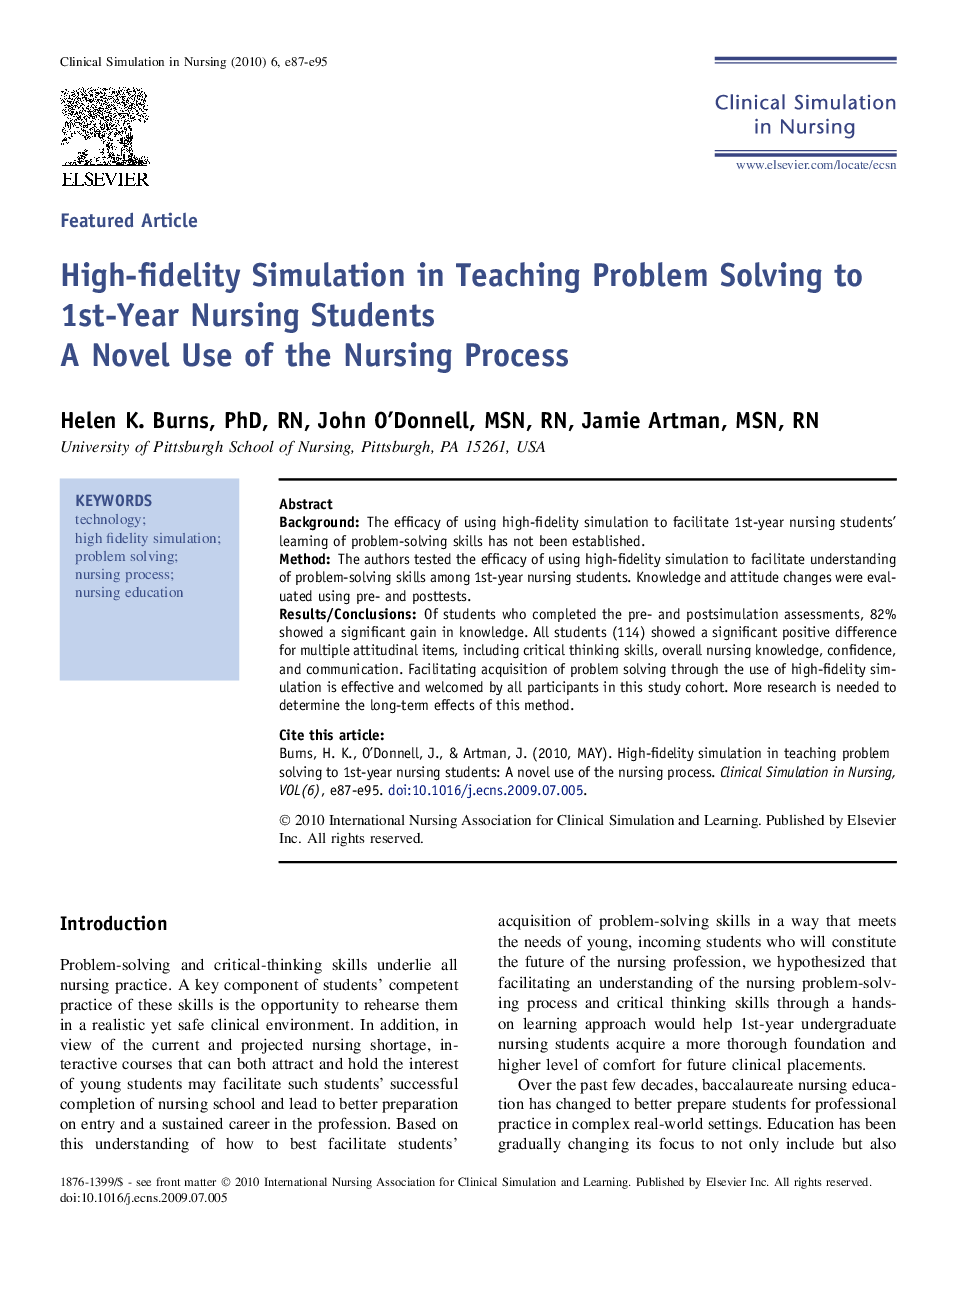 High-fidelity Simulation in Teaching Problem Solving to 1st-Year Nursing Students : A Novel Use of the Nursing Process